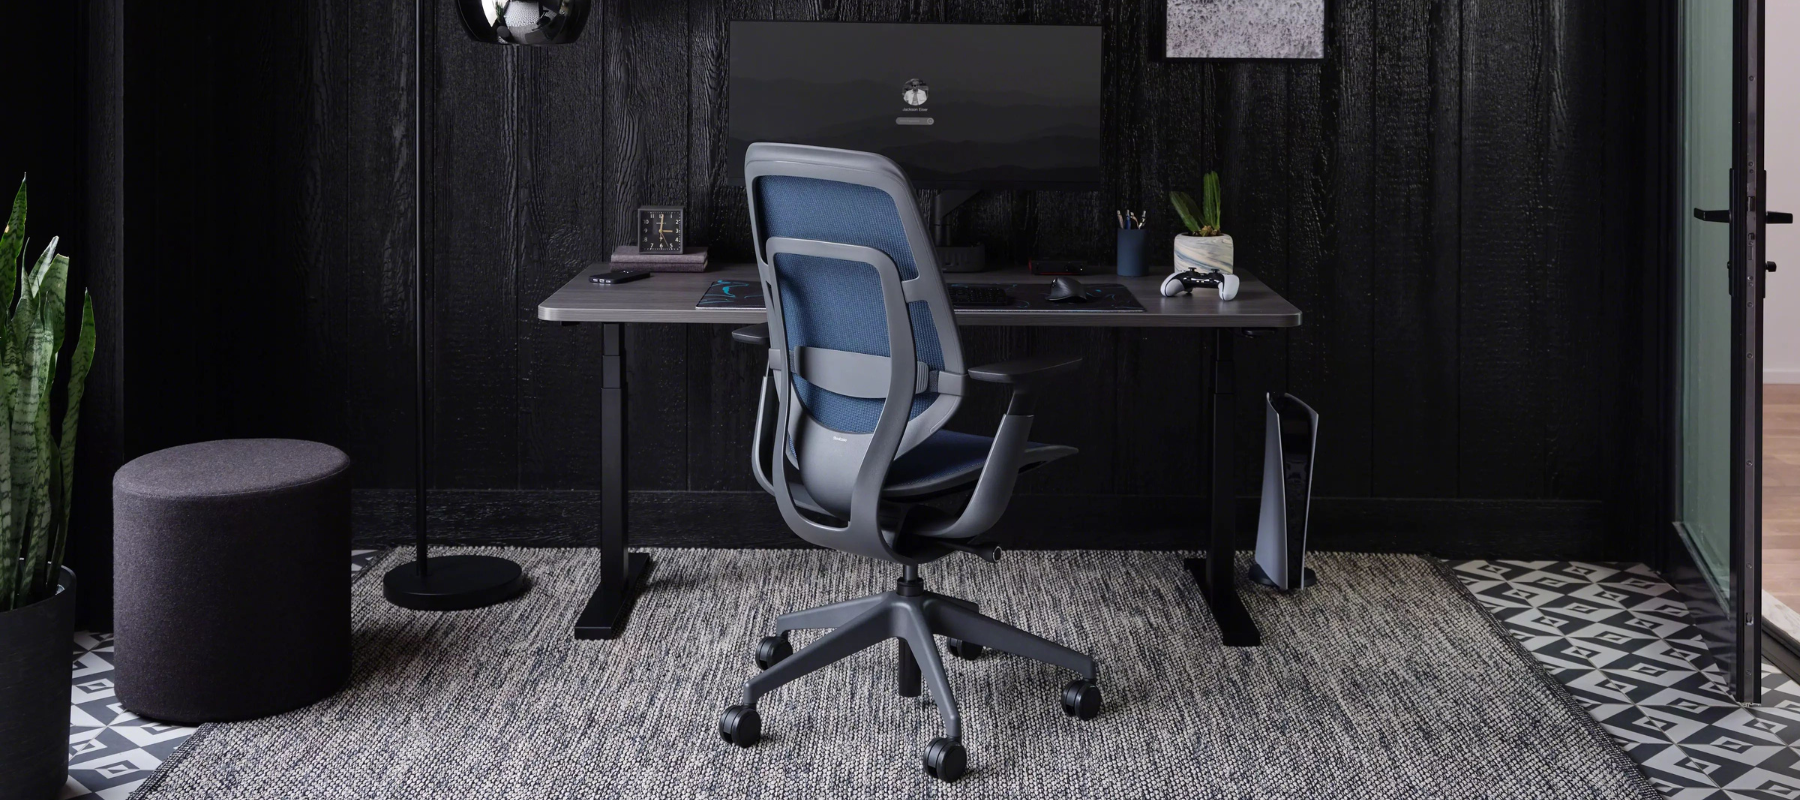 Steelcase Karman chair in blue mesh and grey frame in front of standing desk and computer